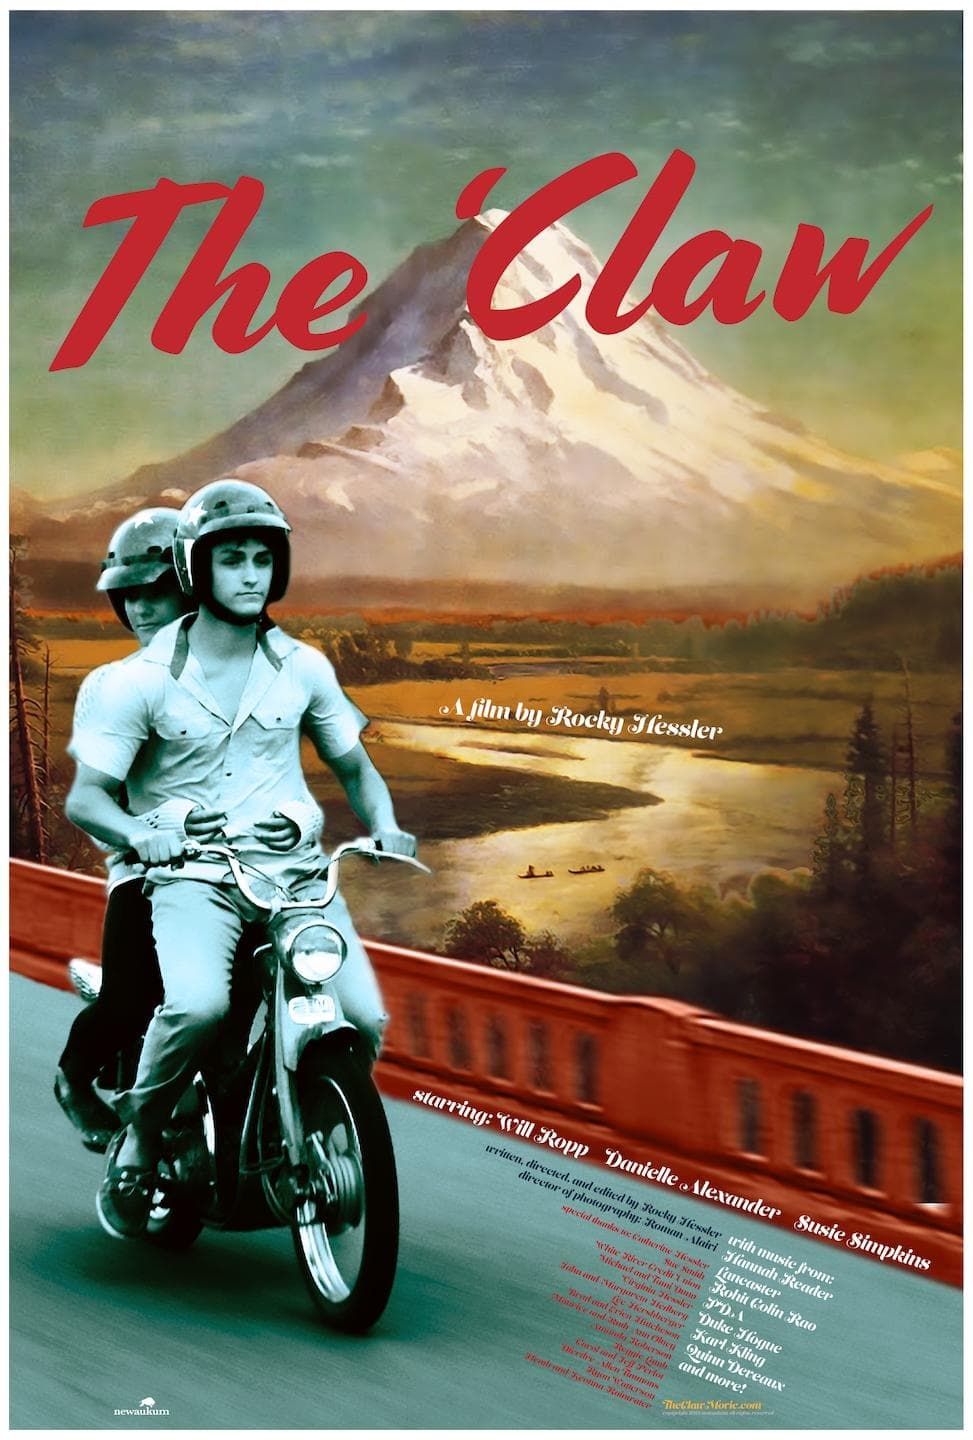 The 'Claw